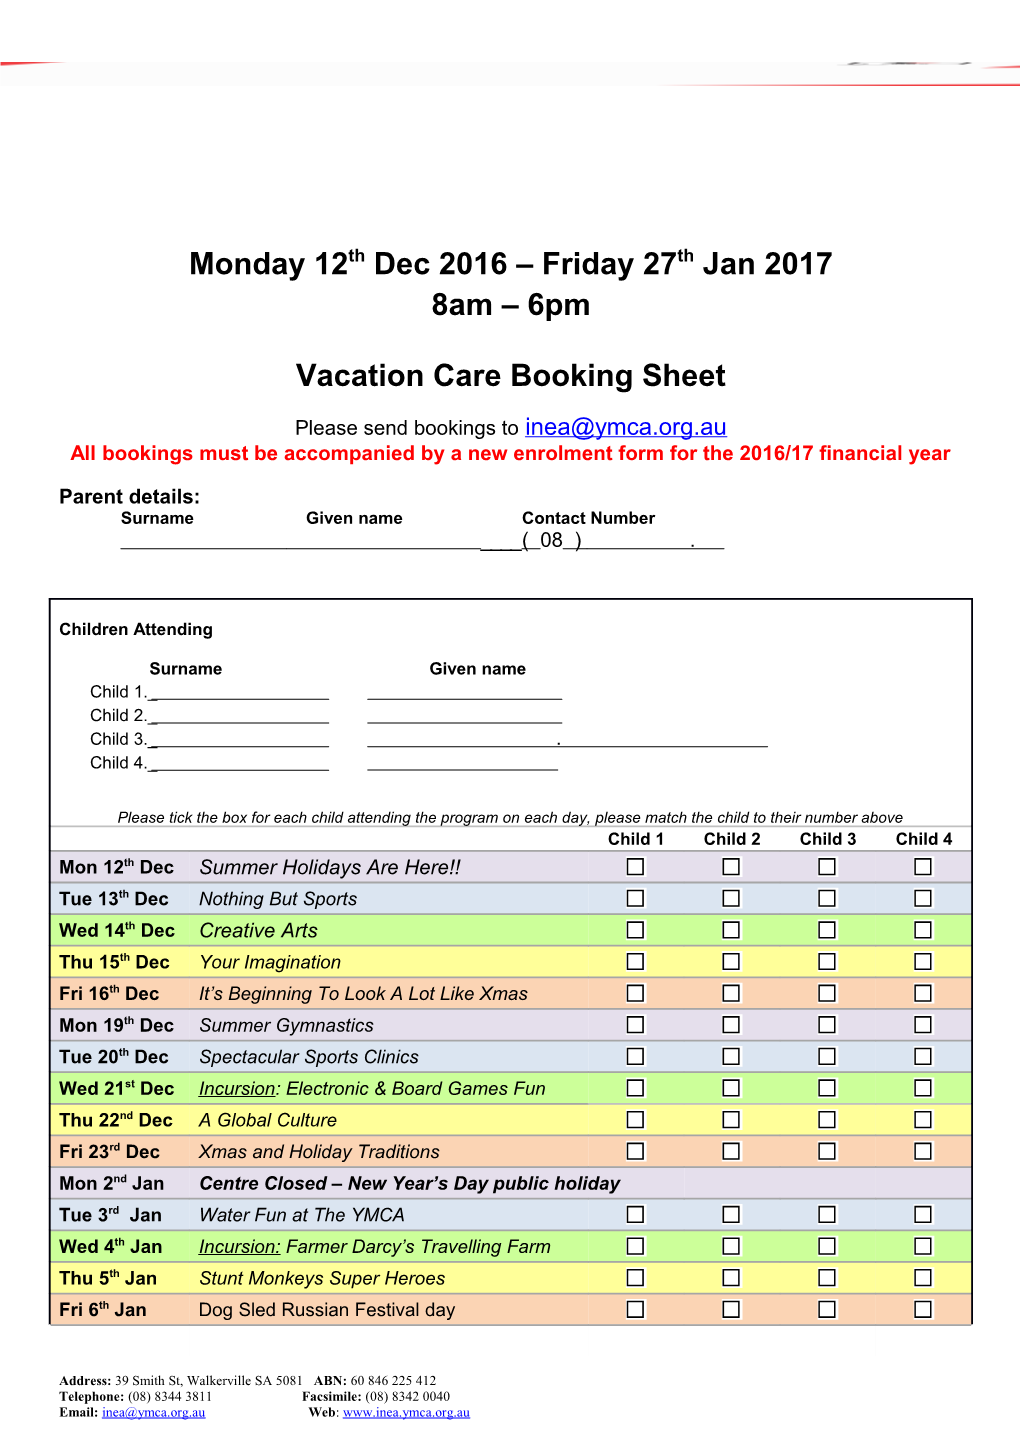 Walkerville YMCA Vacation Care Booking Sheet